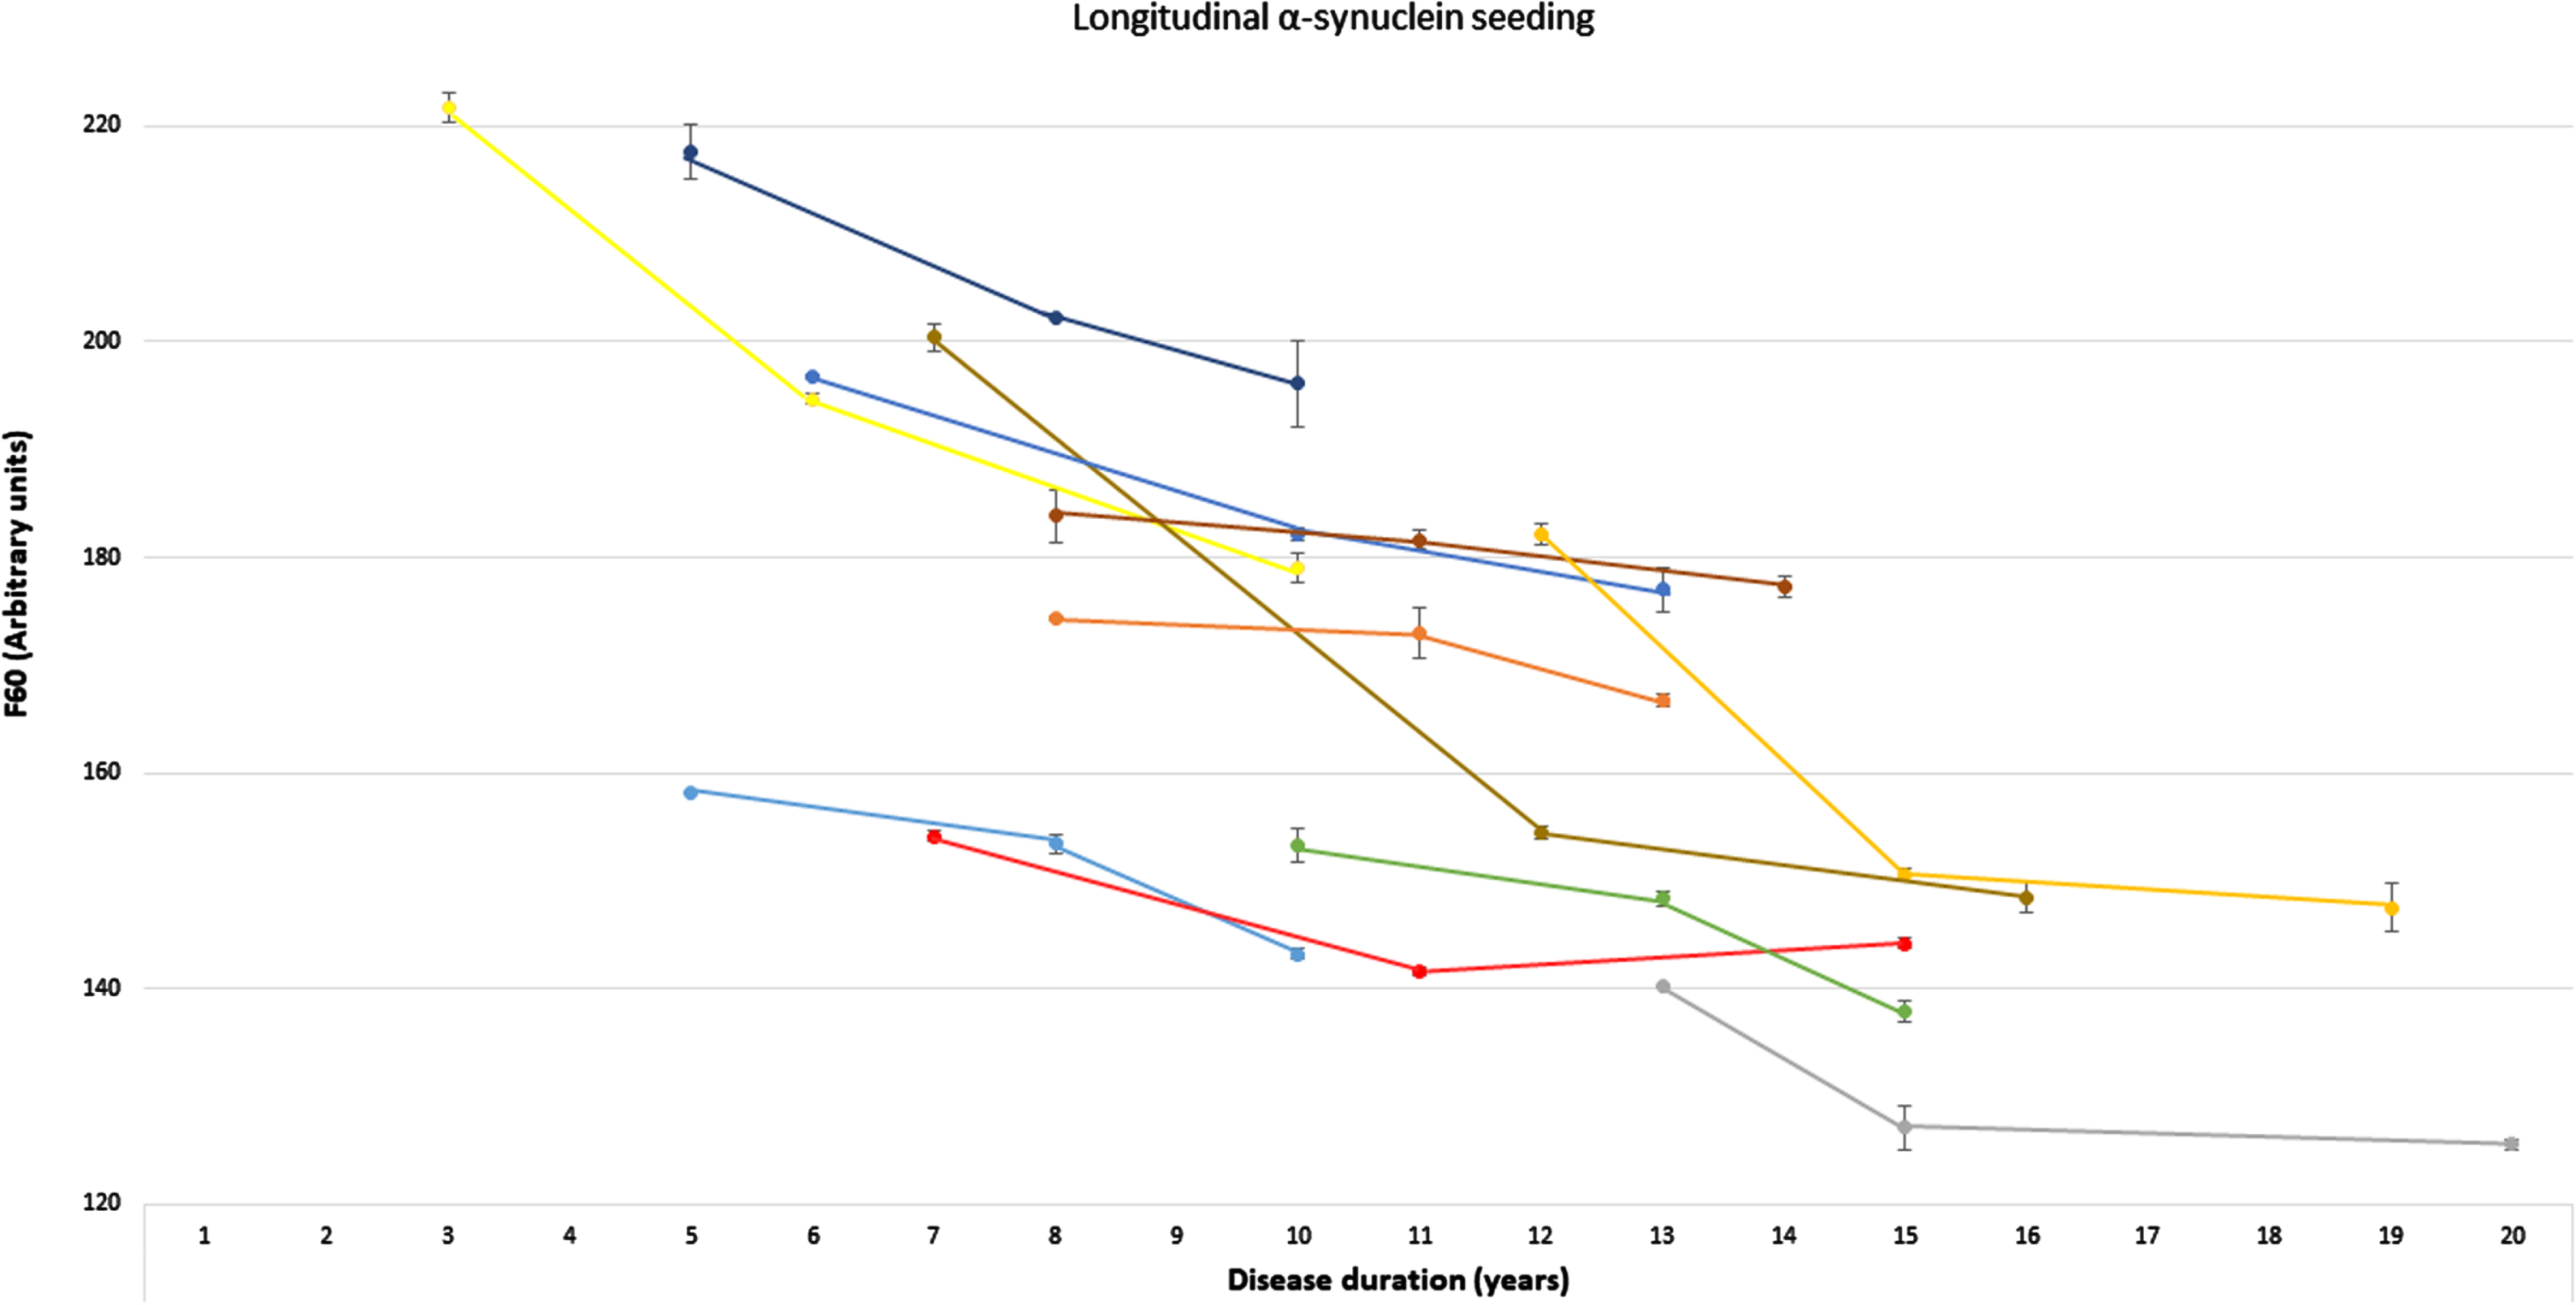 Longitudinal α-synuclein seeding of individuals with Parkinson’s disease. Presentation of longitudinal values of the α-synuclein seed amplification assay in n = 11 individuals with Parkinson’s disease at three timepoints. α-Synucleins seeding is displayed as Thioflavin T signal intensity after 60 hours (F60). Each colored line represents longitudinal values of one individual with Parkinson’s disease (mean of both replicates, error bars indicate the standard deviation of both replicates). F60, Thioflavin T signal intensity after 60 hours.